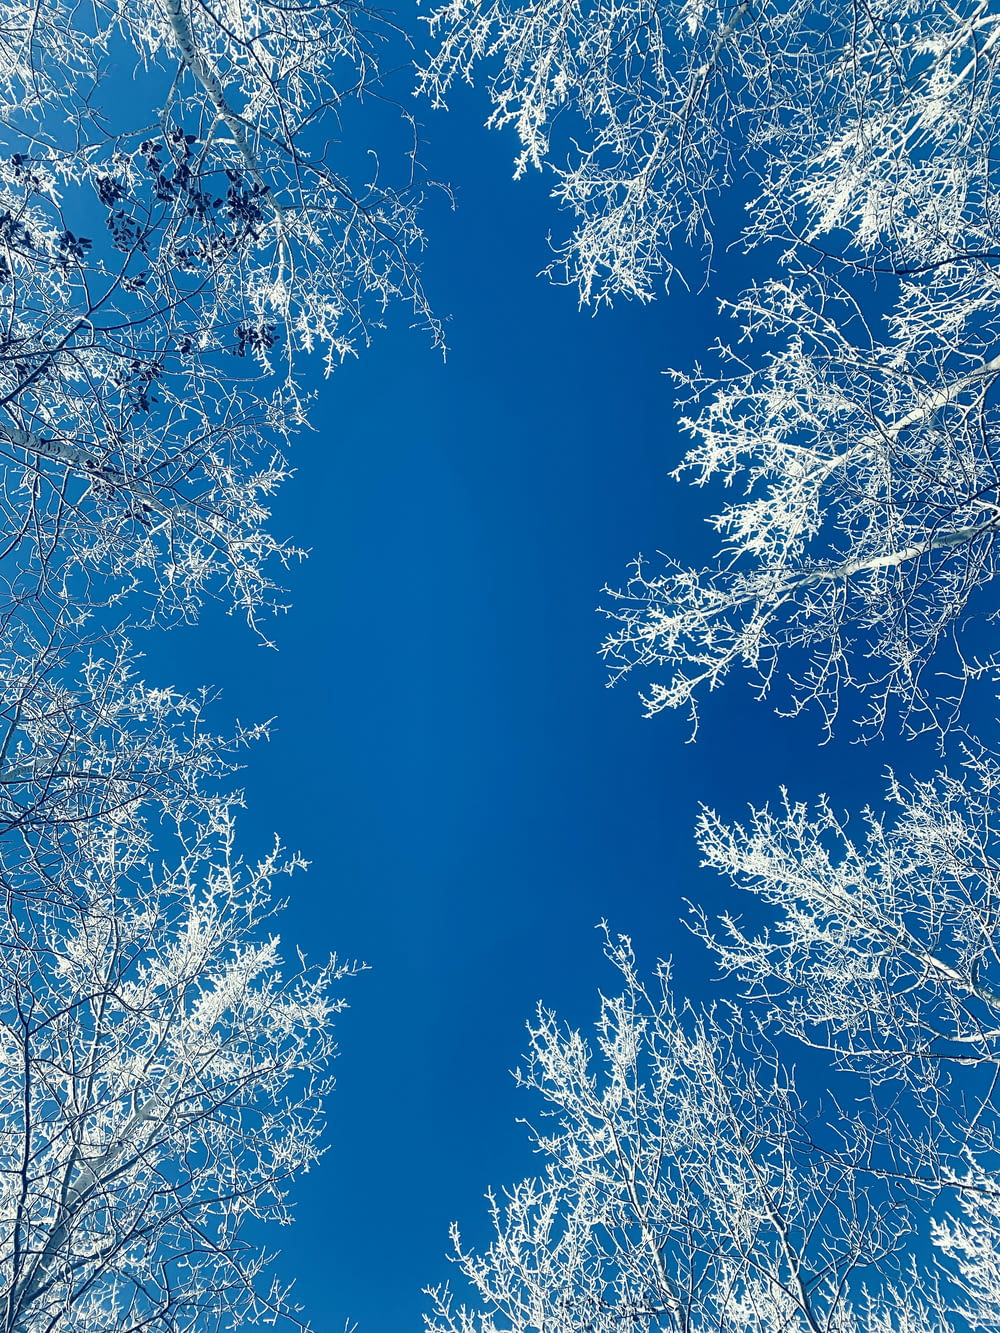 a blue sky is seen through the branches of trees